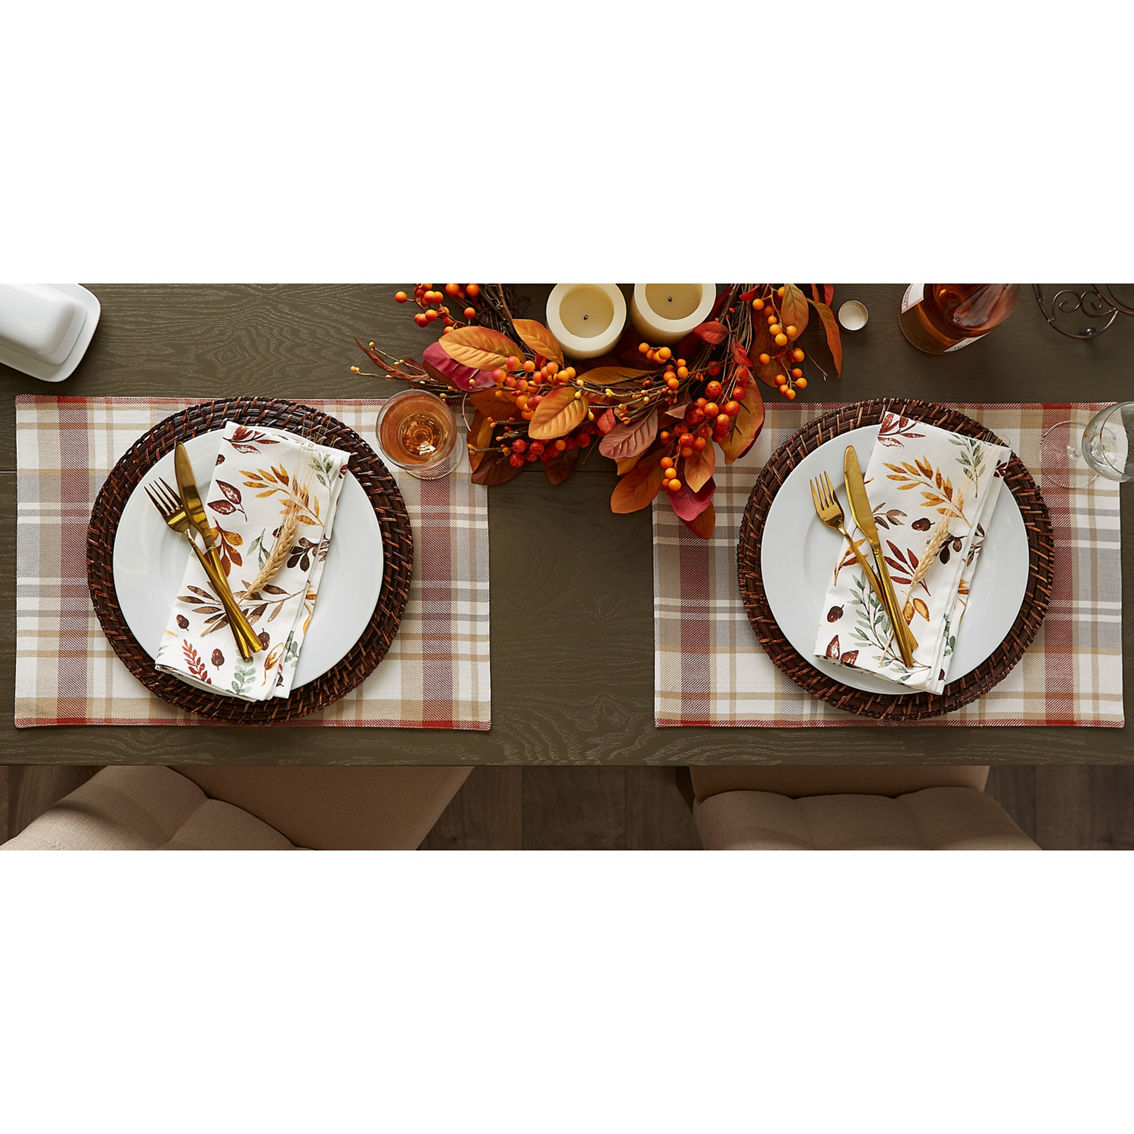 Design Imports Thankful Reversible Placemats, Set of 4 - Image 7 of 9